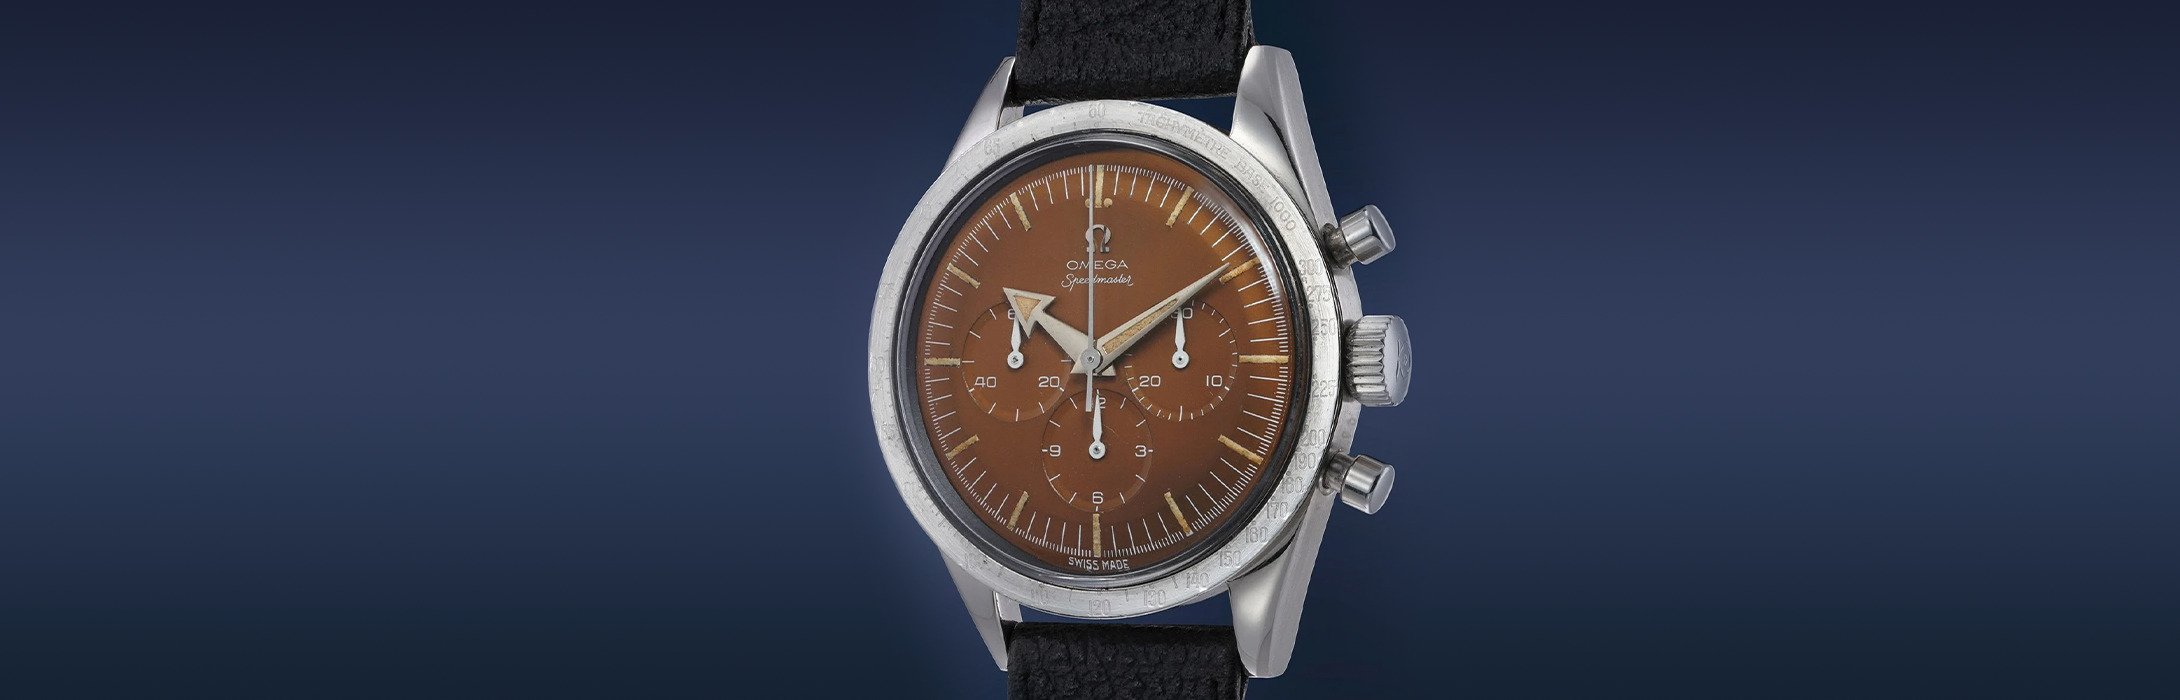 Most Expensive Omega Watch Ever Sold